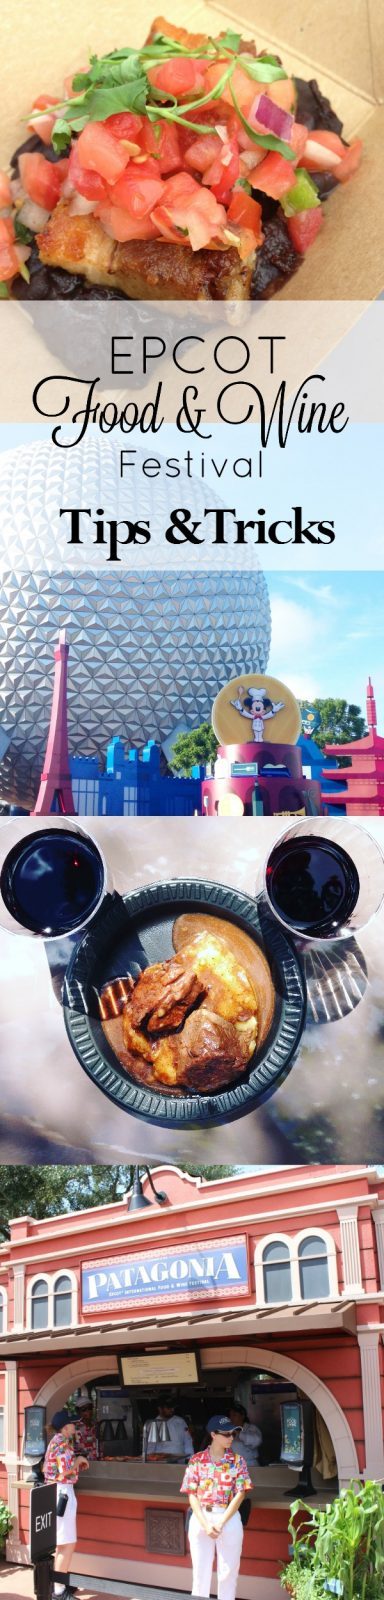 Tips & tricks for making the most of Epcot Food & Wine Festival! How to prepare for a visit to the International Food & Wine Fest, including how to not wait in line at the booths and how to stay cool!